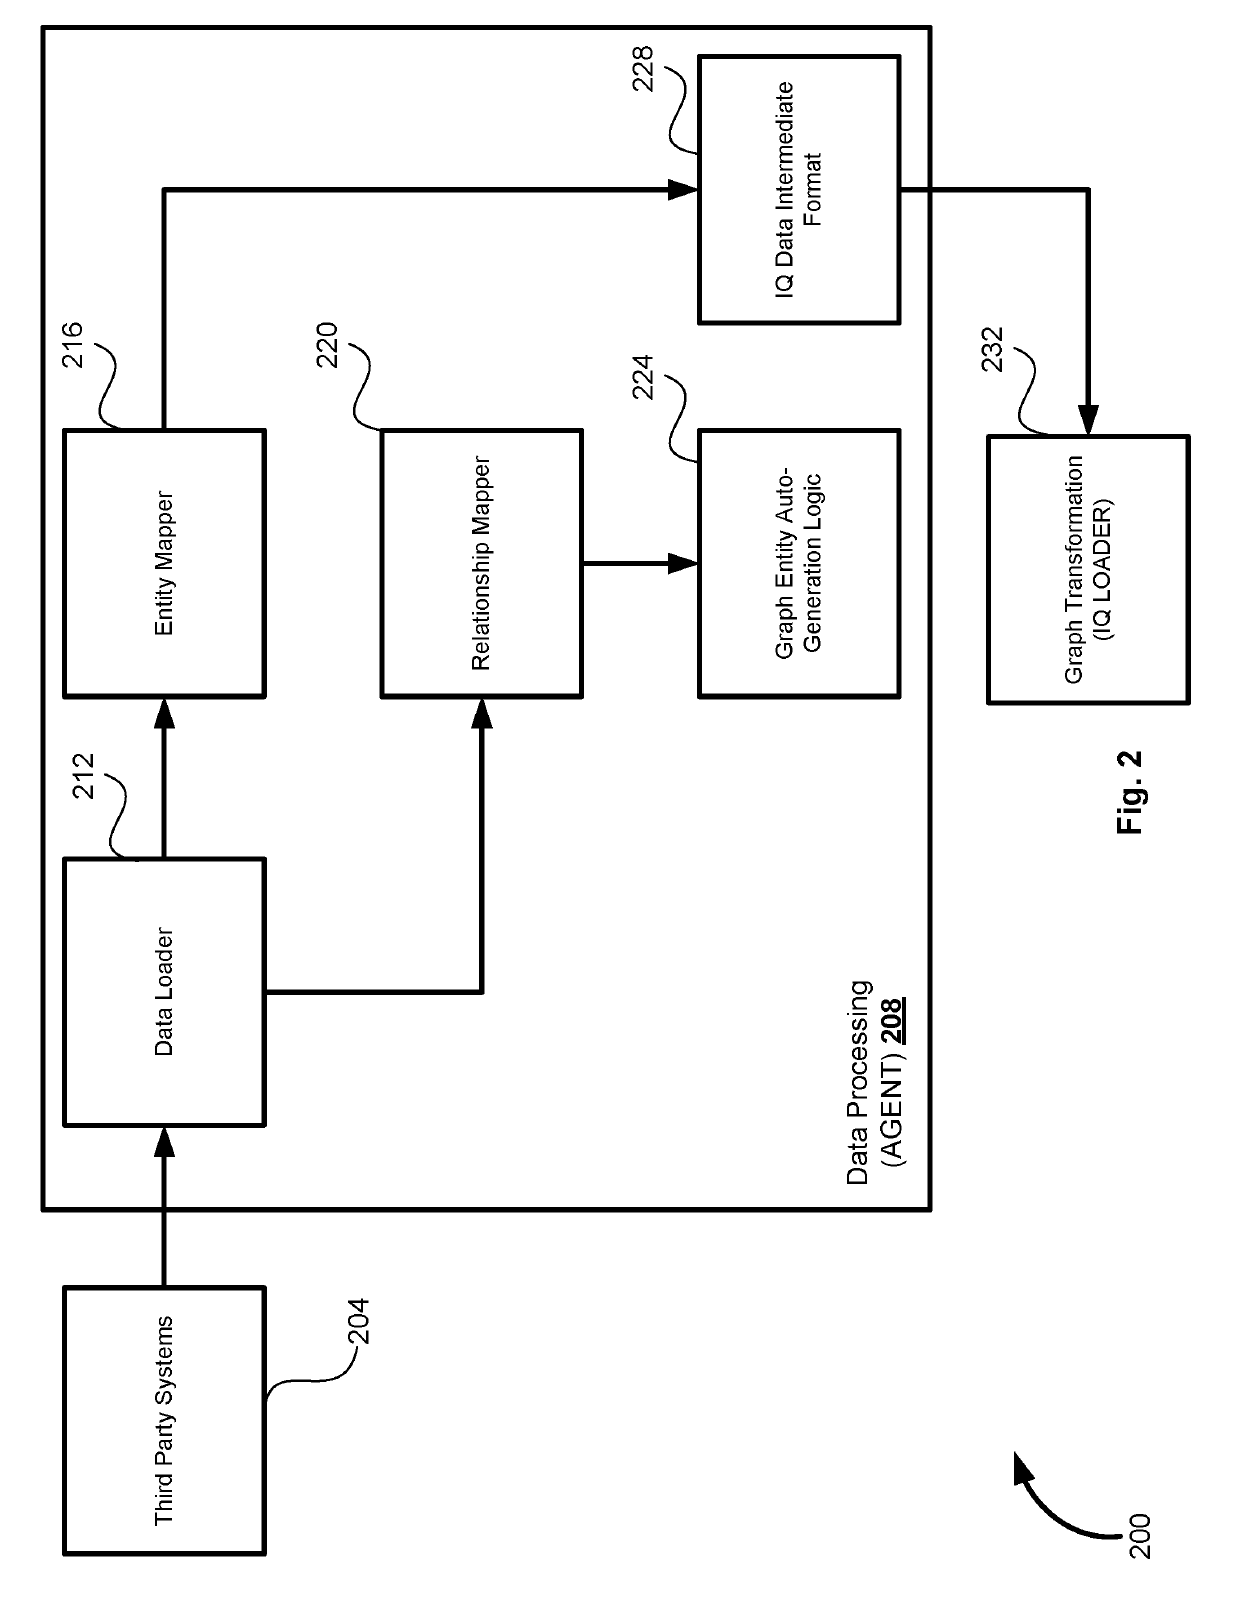 Systems and methods of providing graphical relationships of disparate data object formats